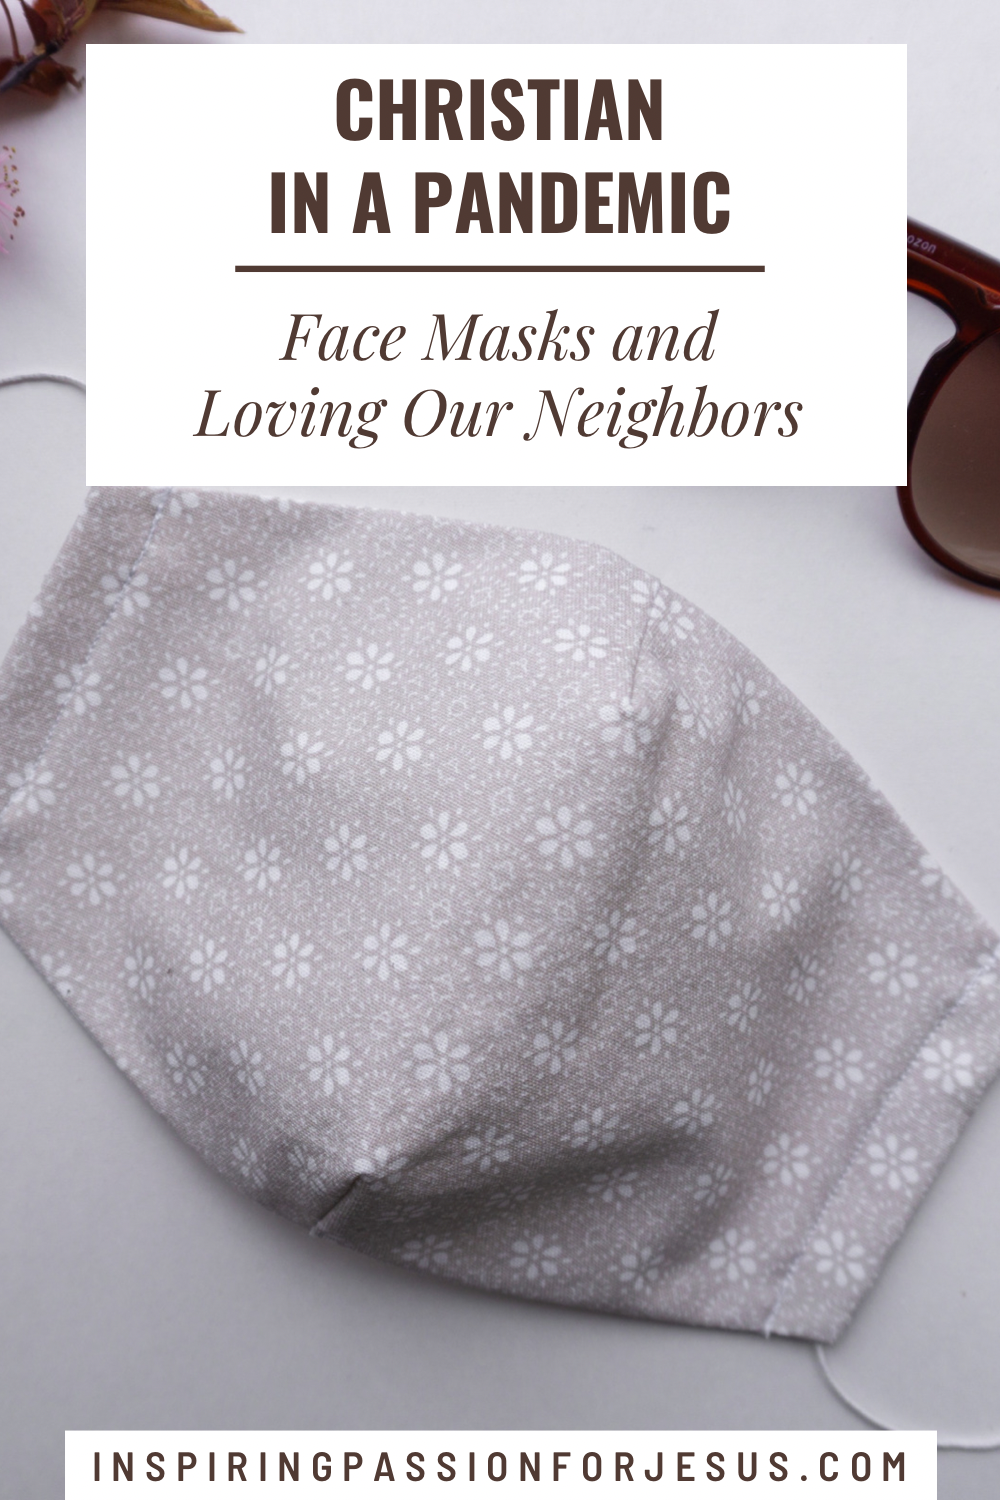 Christian in a Pandemic: Face Masks and Loving Our Neighbors